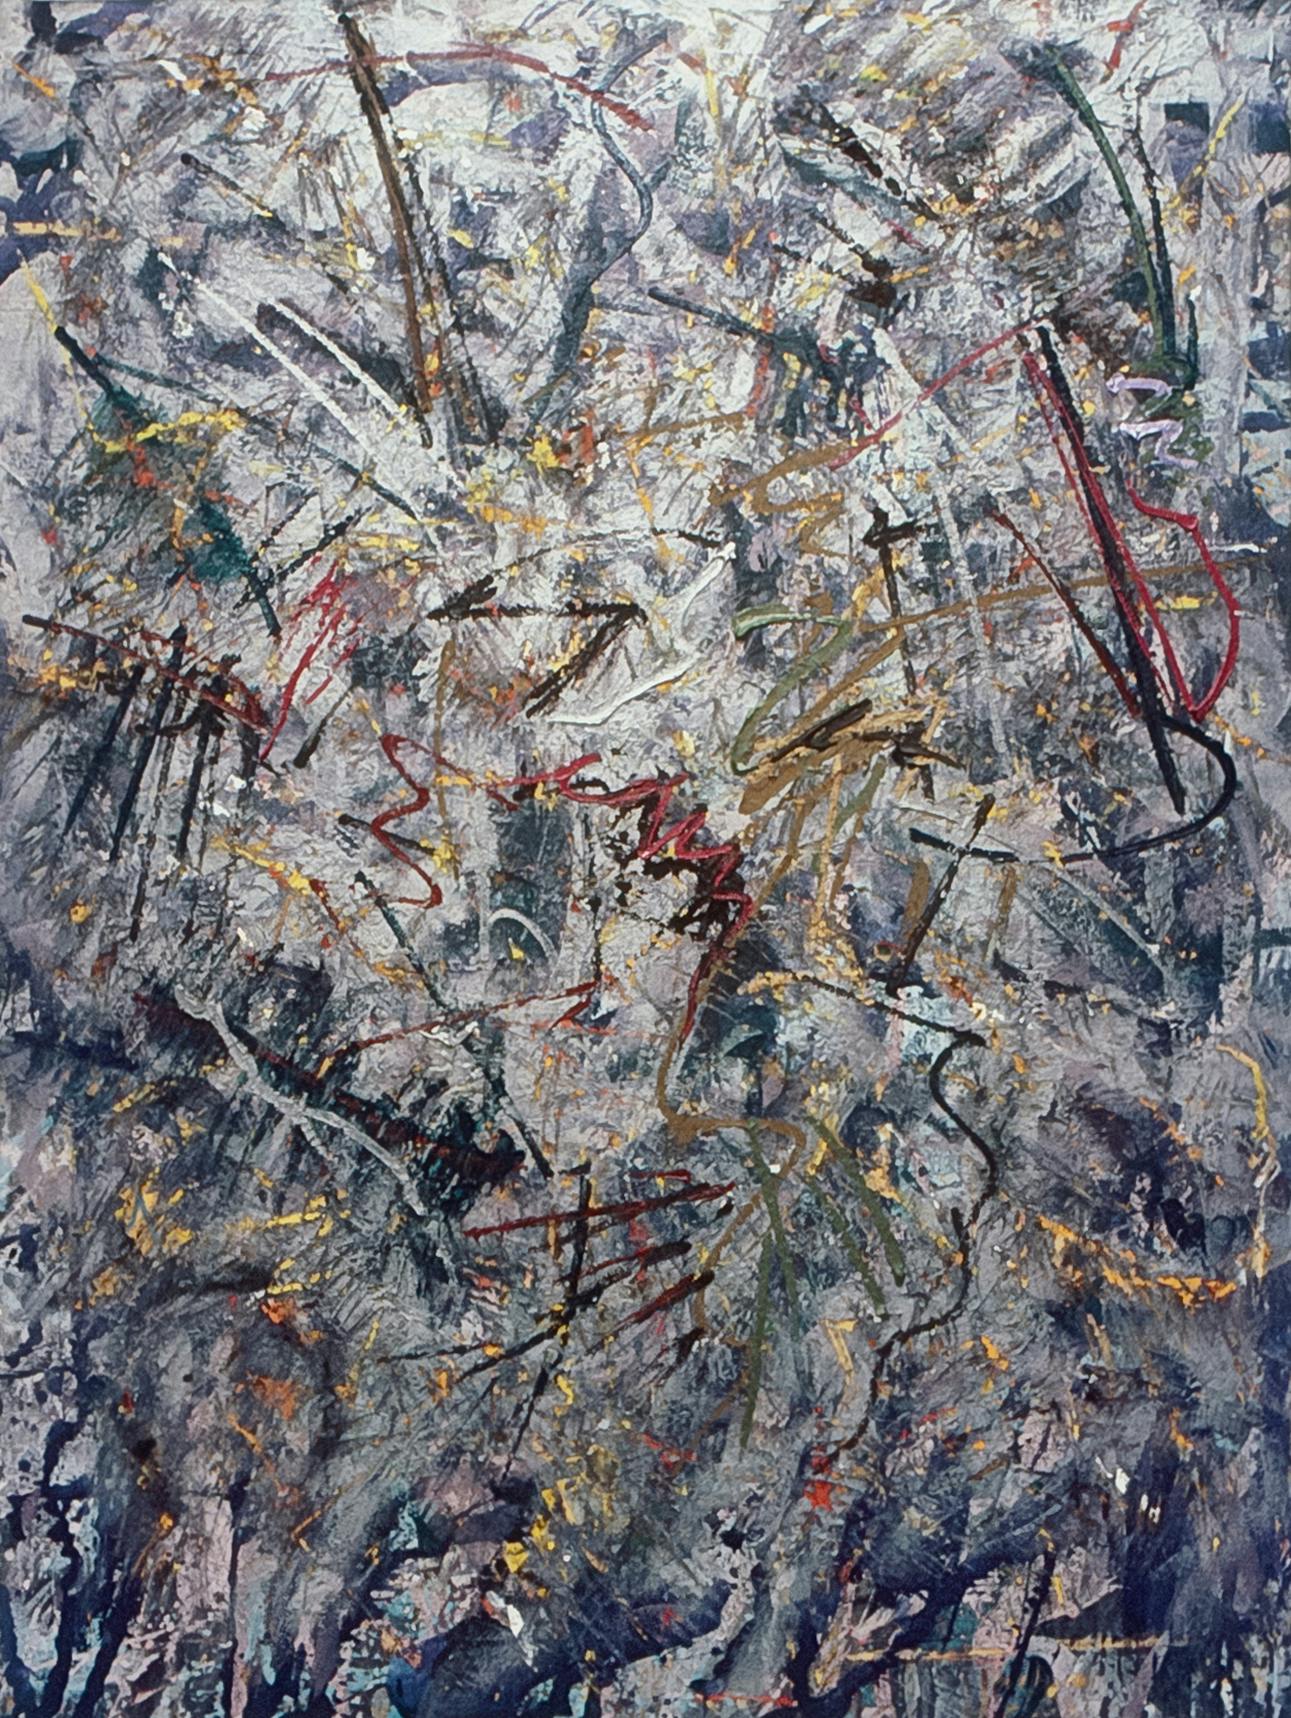 An abstract painting made using dozens of layers of blue, black, white, yellow, and red paint, swirled and splattered around the canvas.